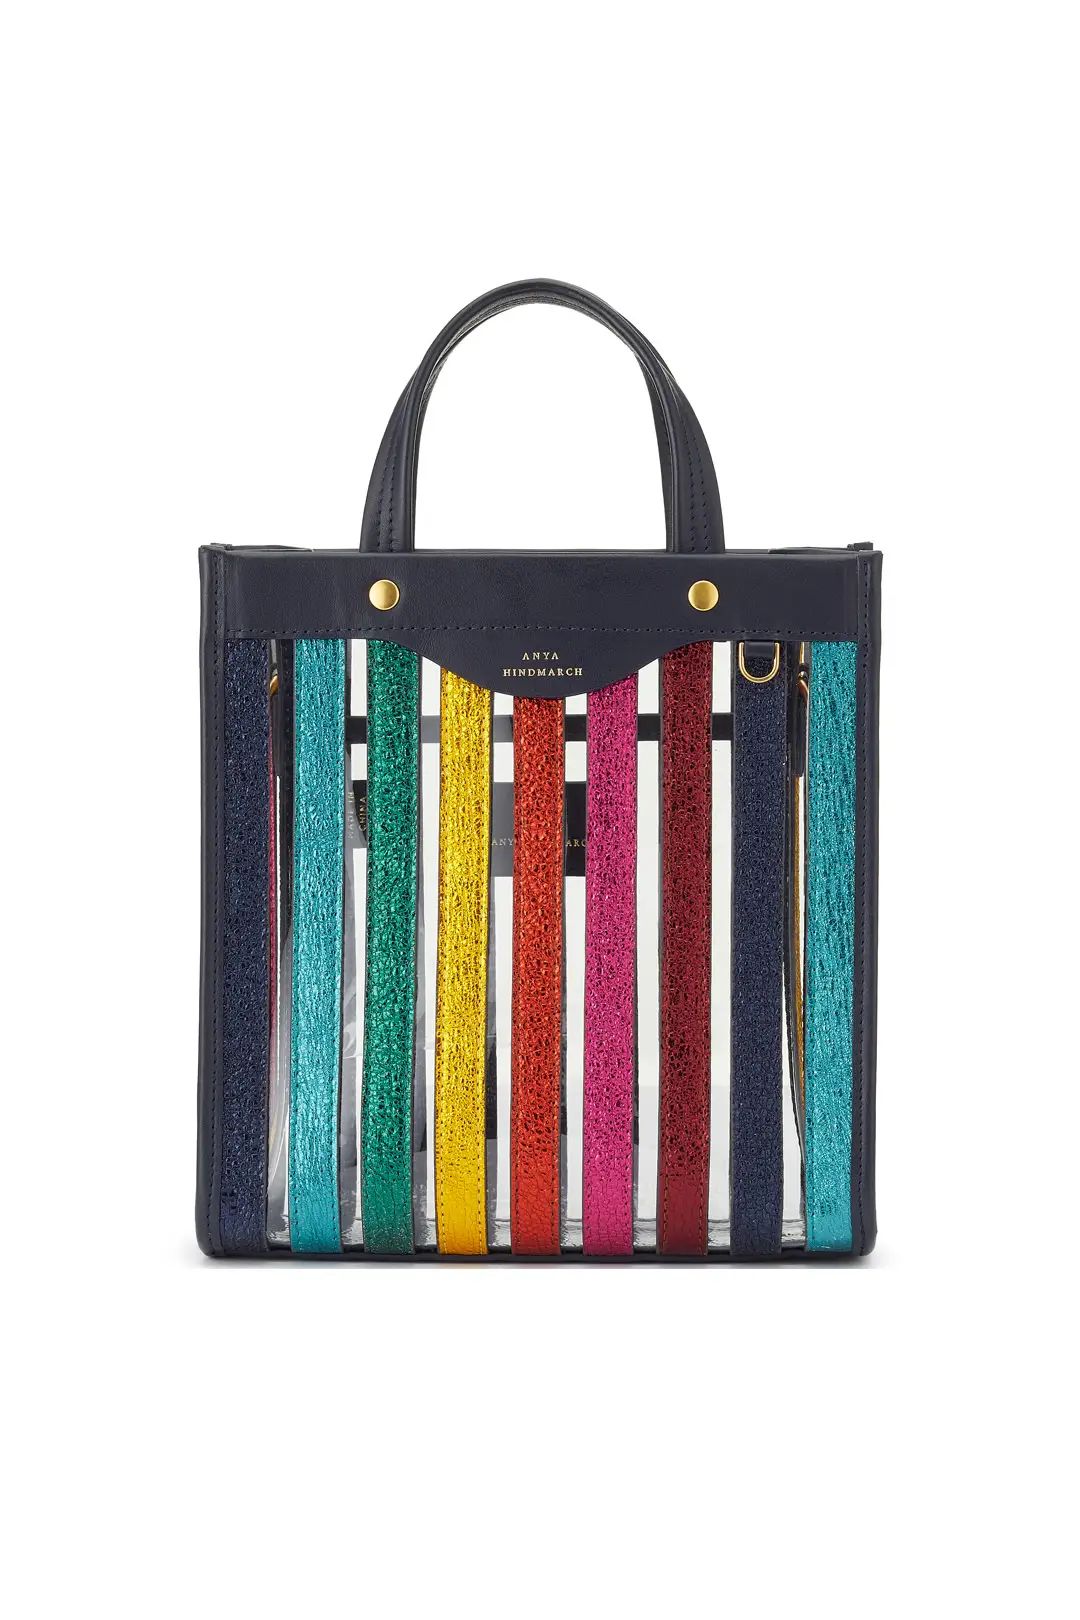 Anya Hindmarch Clear Multi Stripes Tote | Rent The Runway